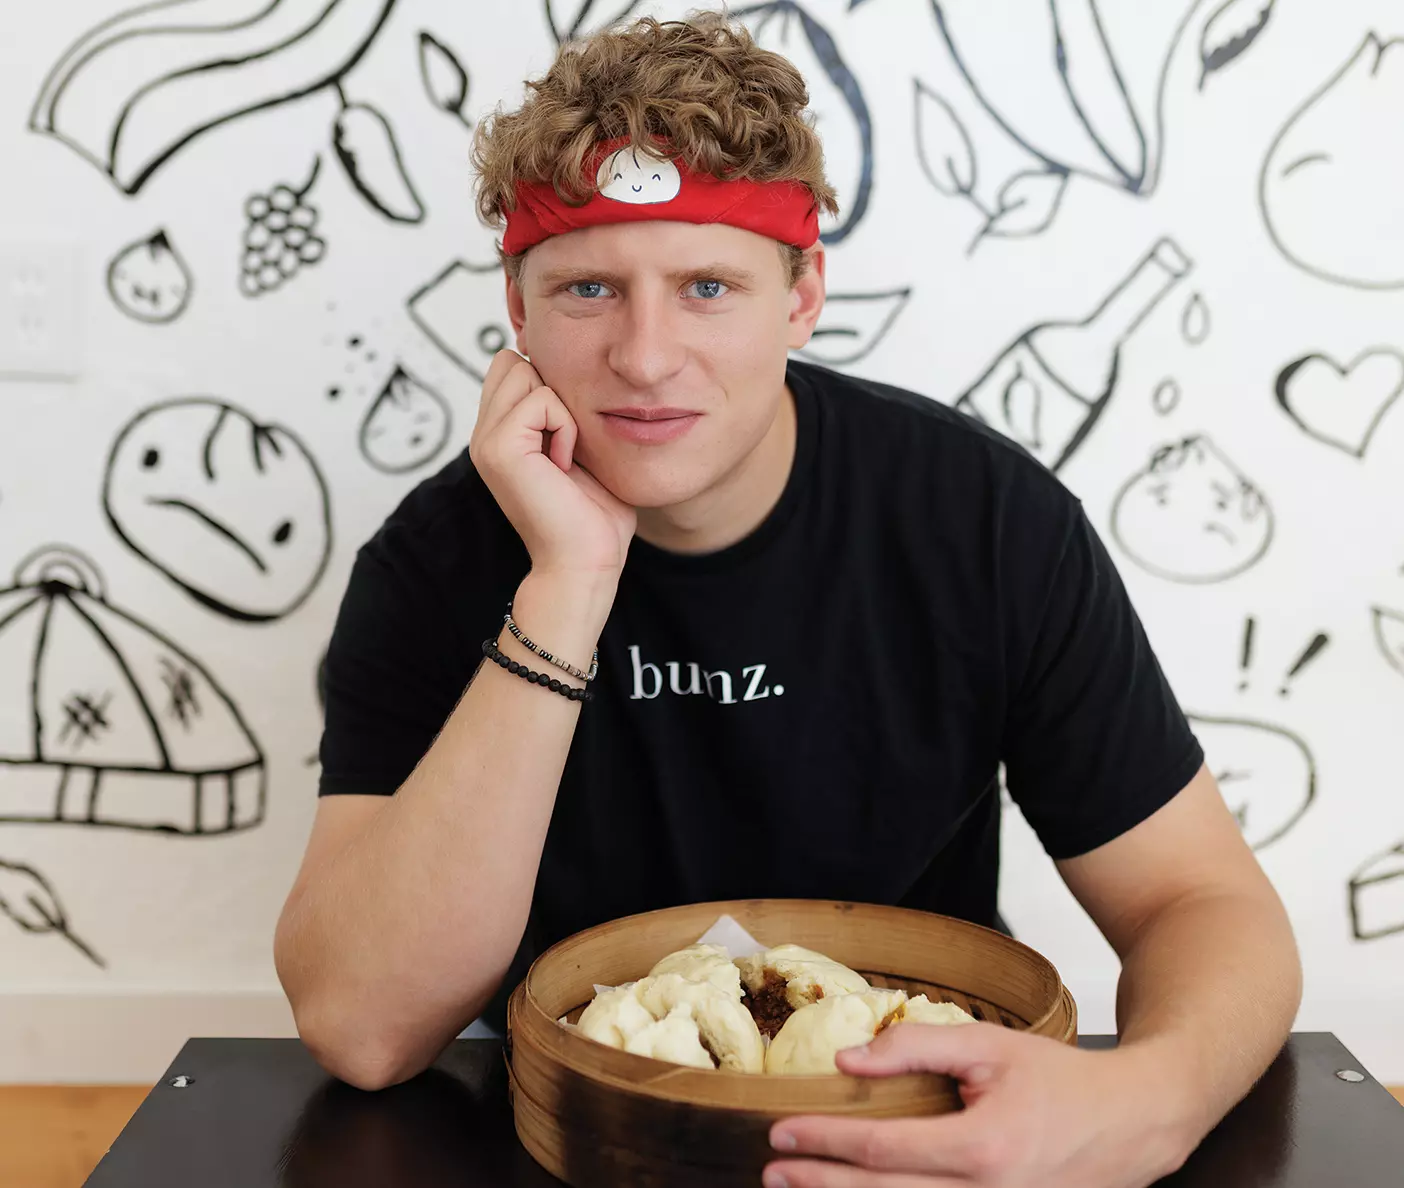 Jimmy Watson sits at Bun Boiz with a basket of steamed buns in front of him. He wears a red headband with a dumpling on it and a black Bun Boiz shirt.